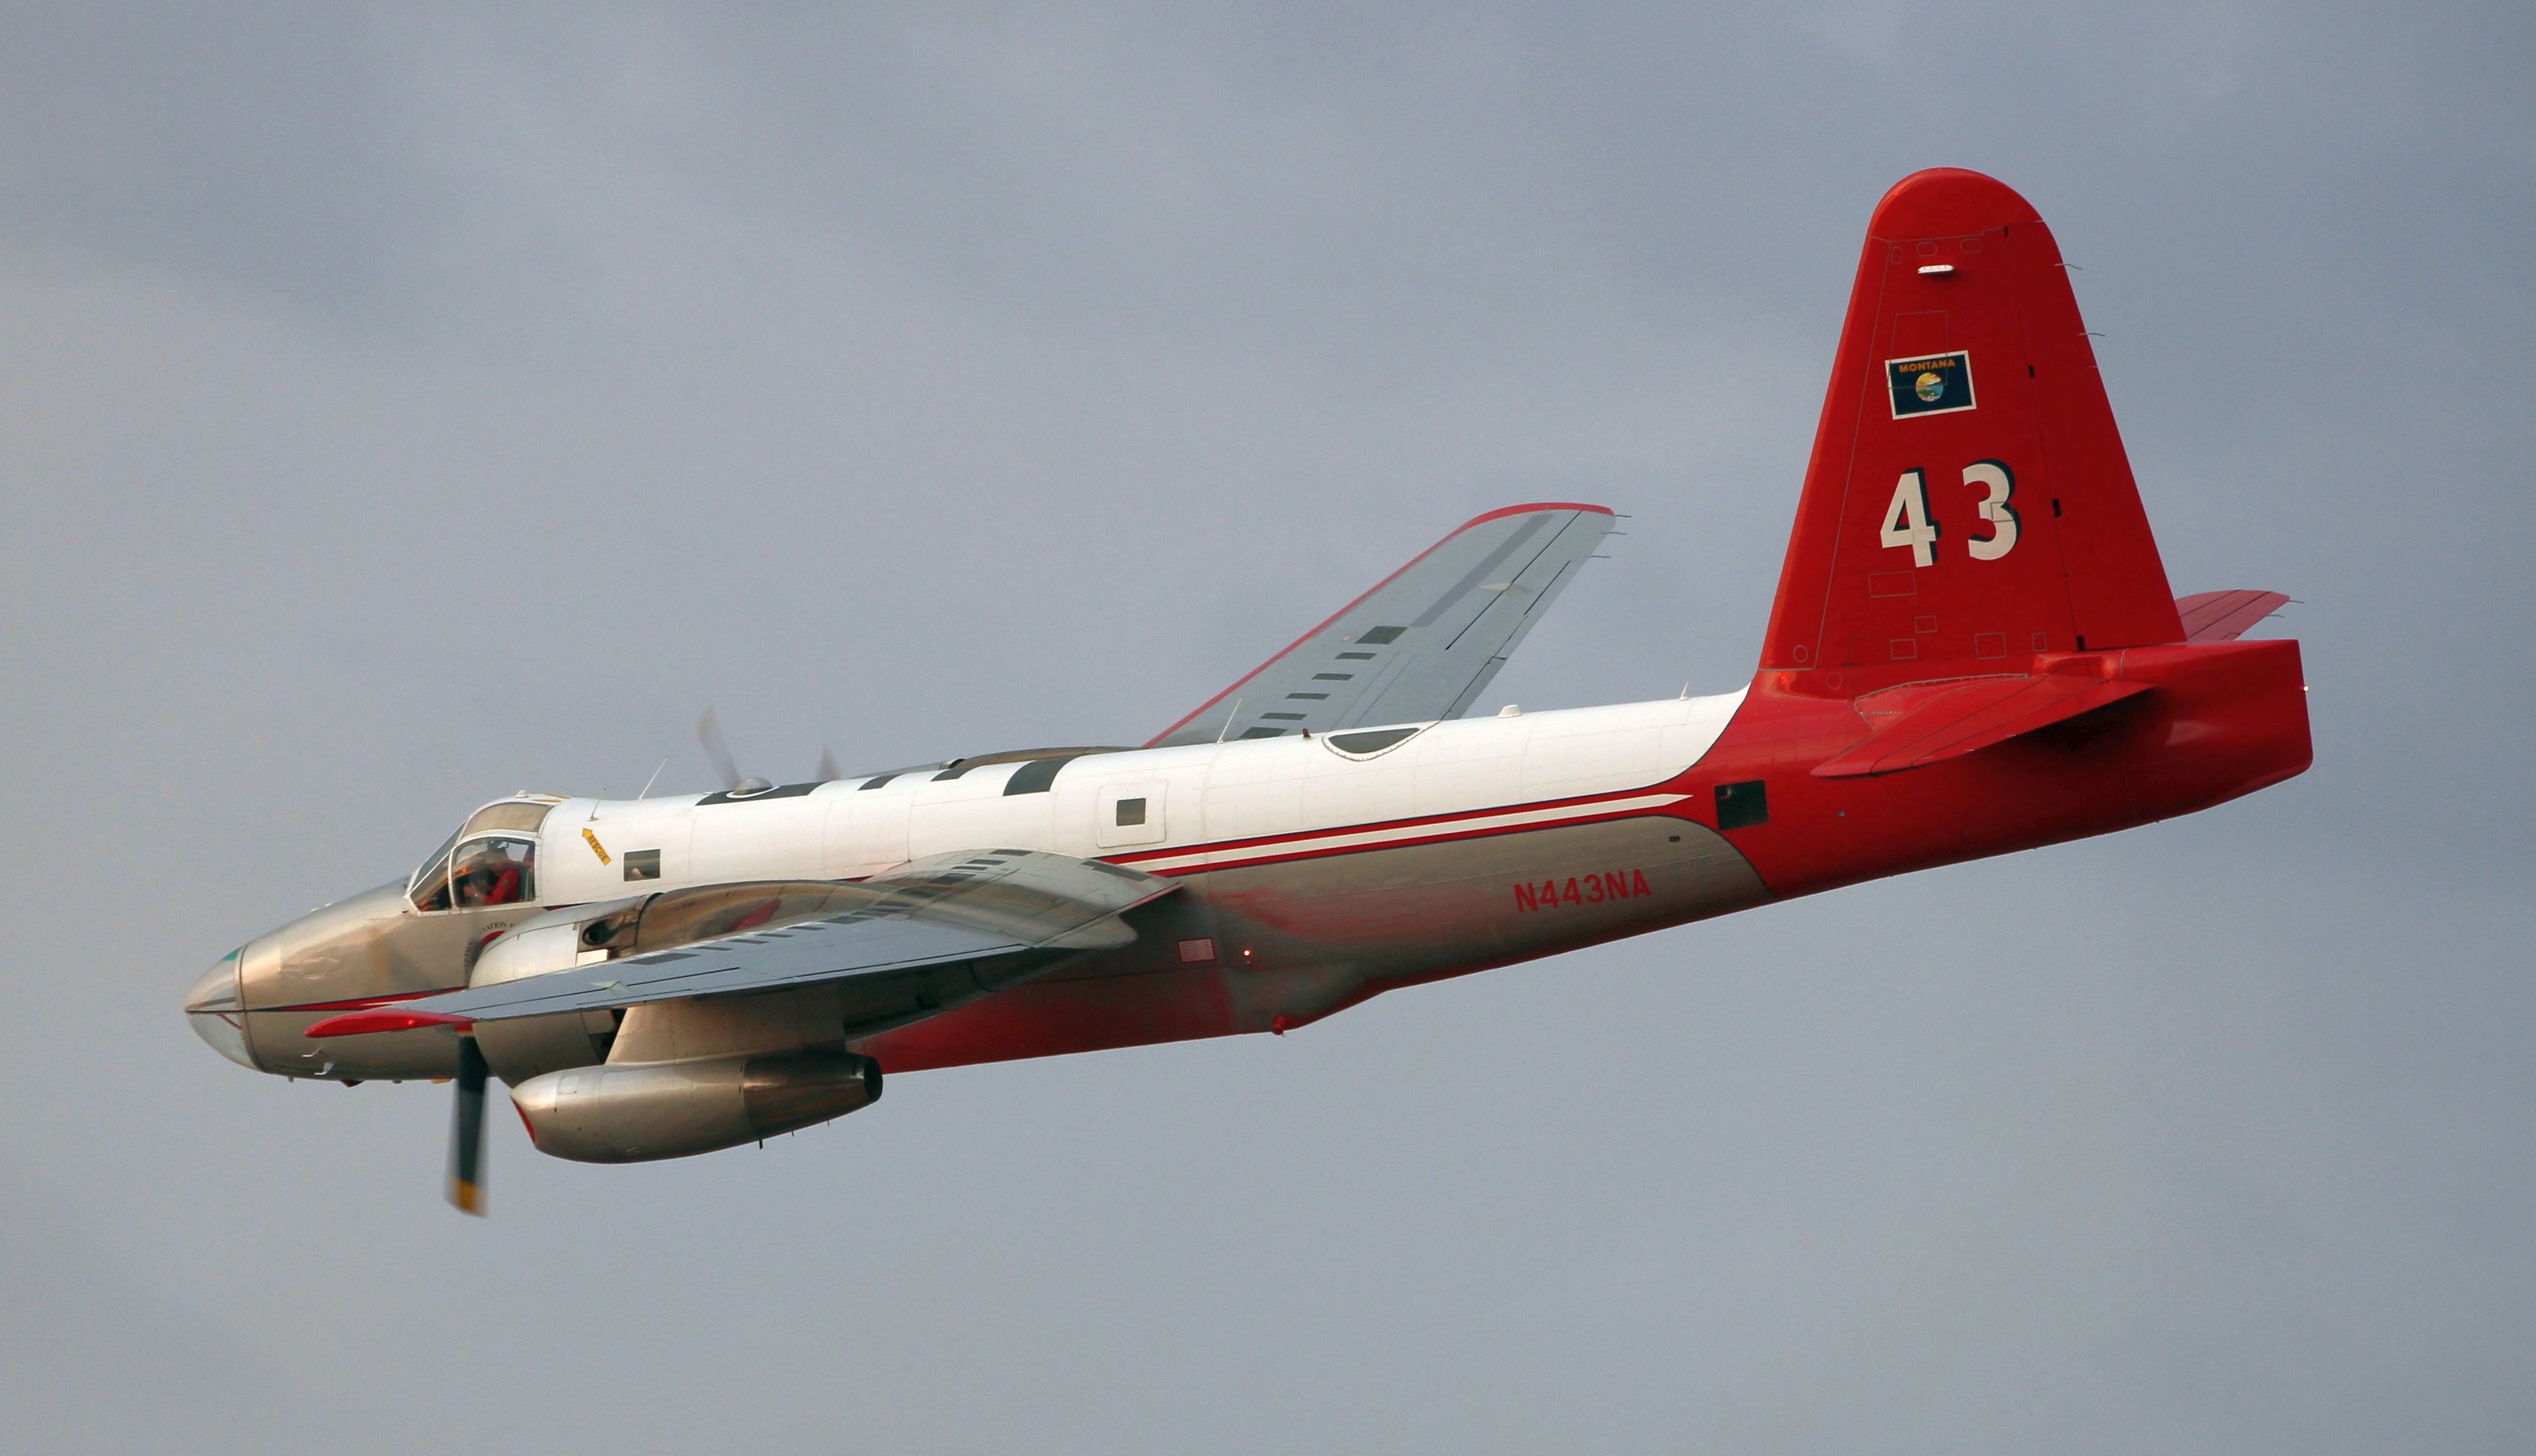 Lockheed P-2 Neptune (N443NA) - Departing Rogue Valley Intl Airport for the Happy Camp Complex fires.